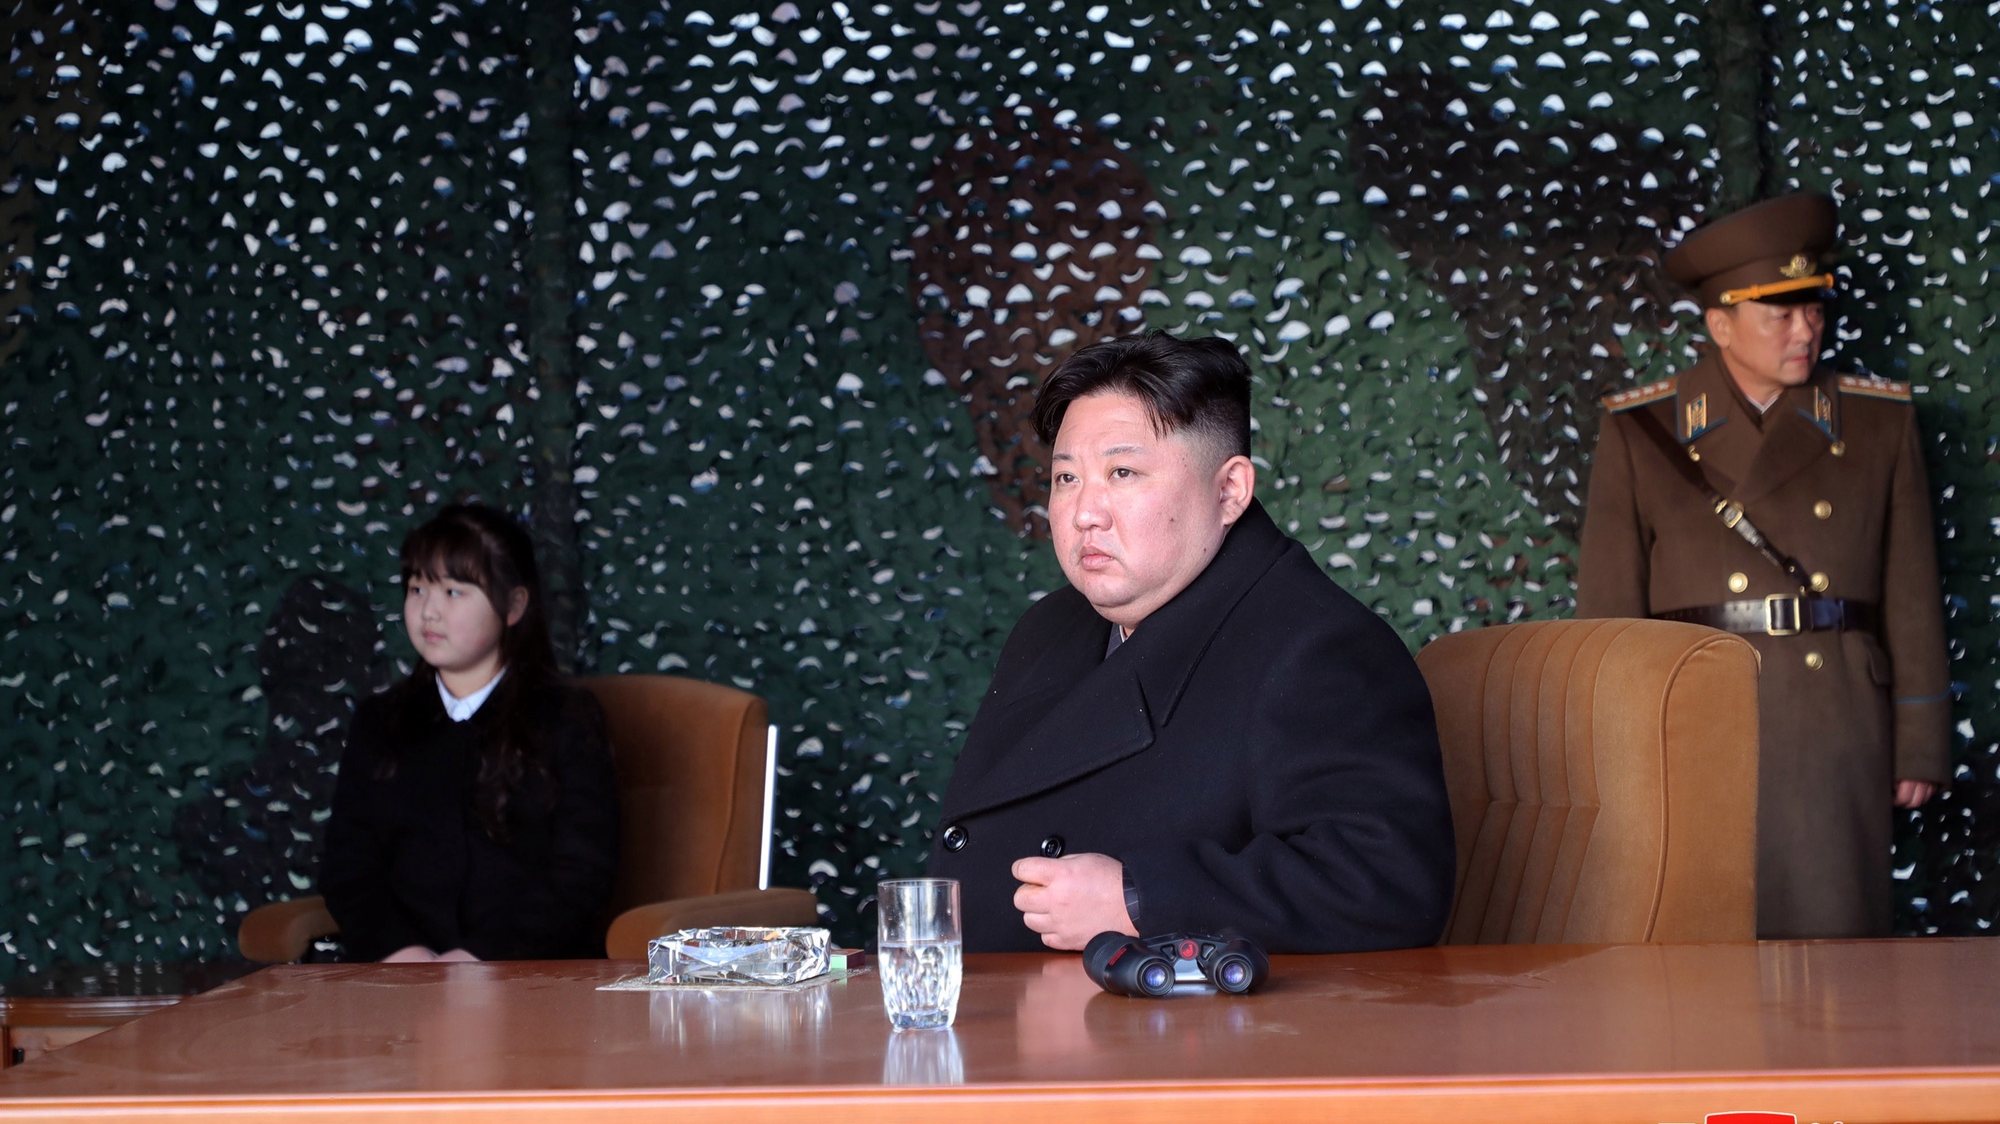 epa10512829 A photo released by the official North Korean Central News Agency (KCNA) shows Supreme Leader Kim Jong Un (C) and his daughter Kim Ju-ae (L) at an artillery drill in an undisclosed location in North Korea, 09 March 2023 (issued 10 March 2023). According to KCNA, Supreme Leader Kim Jong Un &#039;gave field guidance&#039; at the &#039;fire assault drill&#039; by the Hwasong artillery unit of the Korean People&#039;s Army.  EPA/KCNA   EDITORIAL USE ONLY